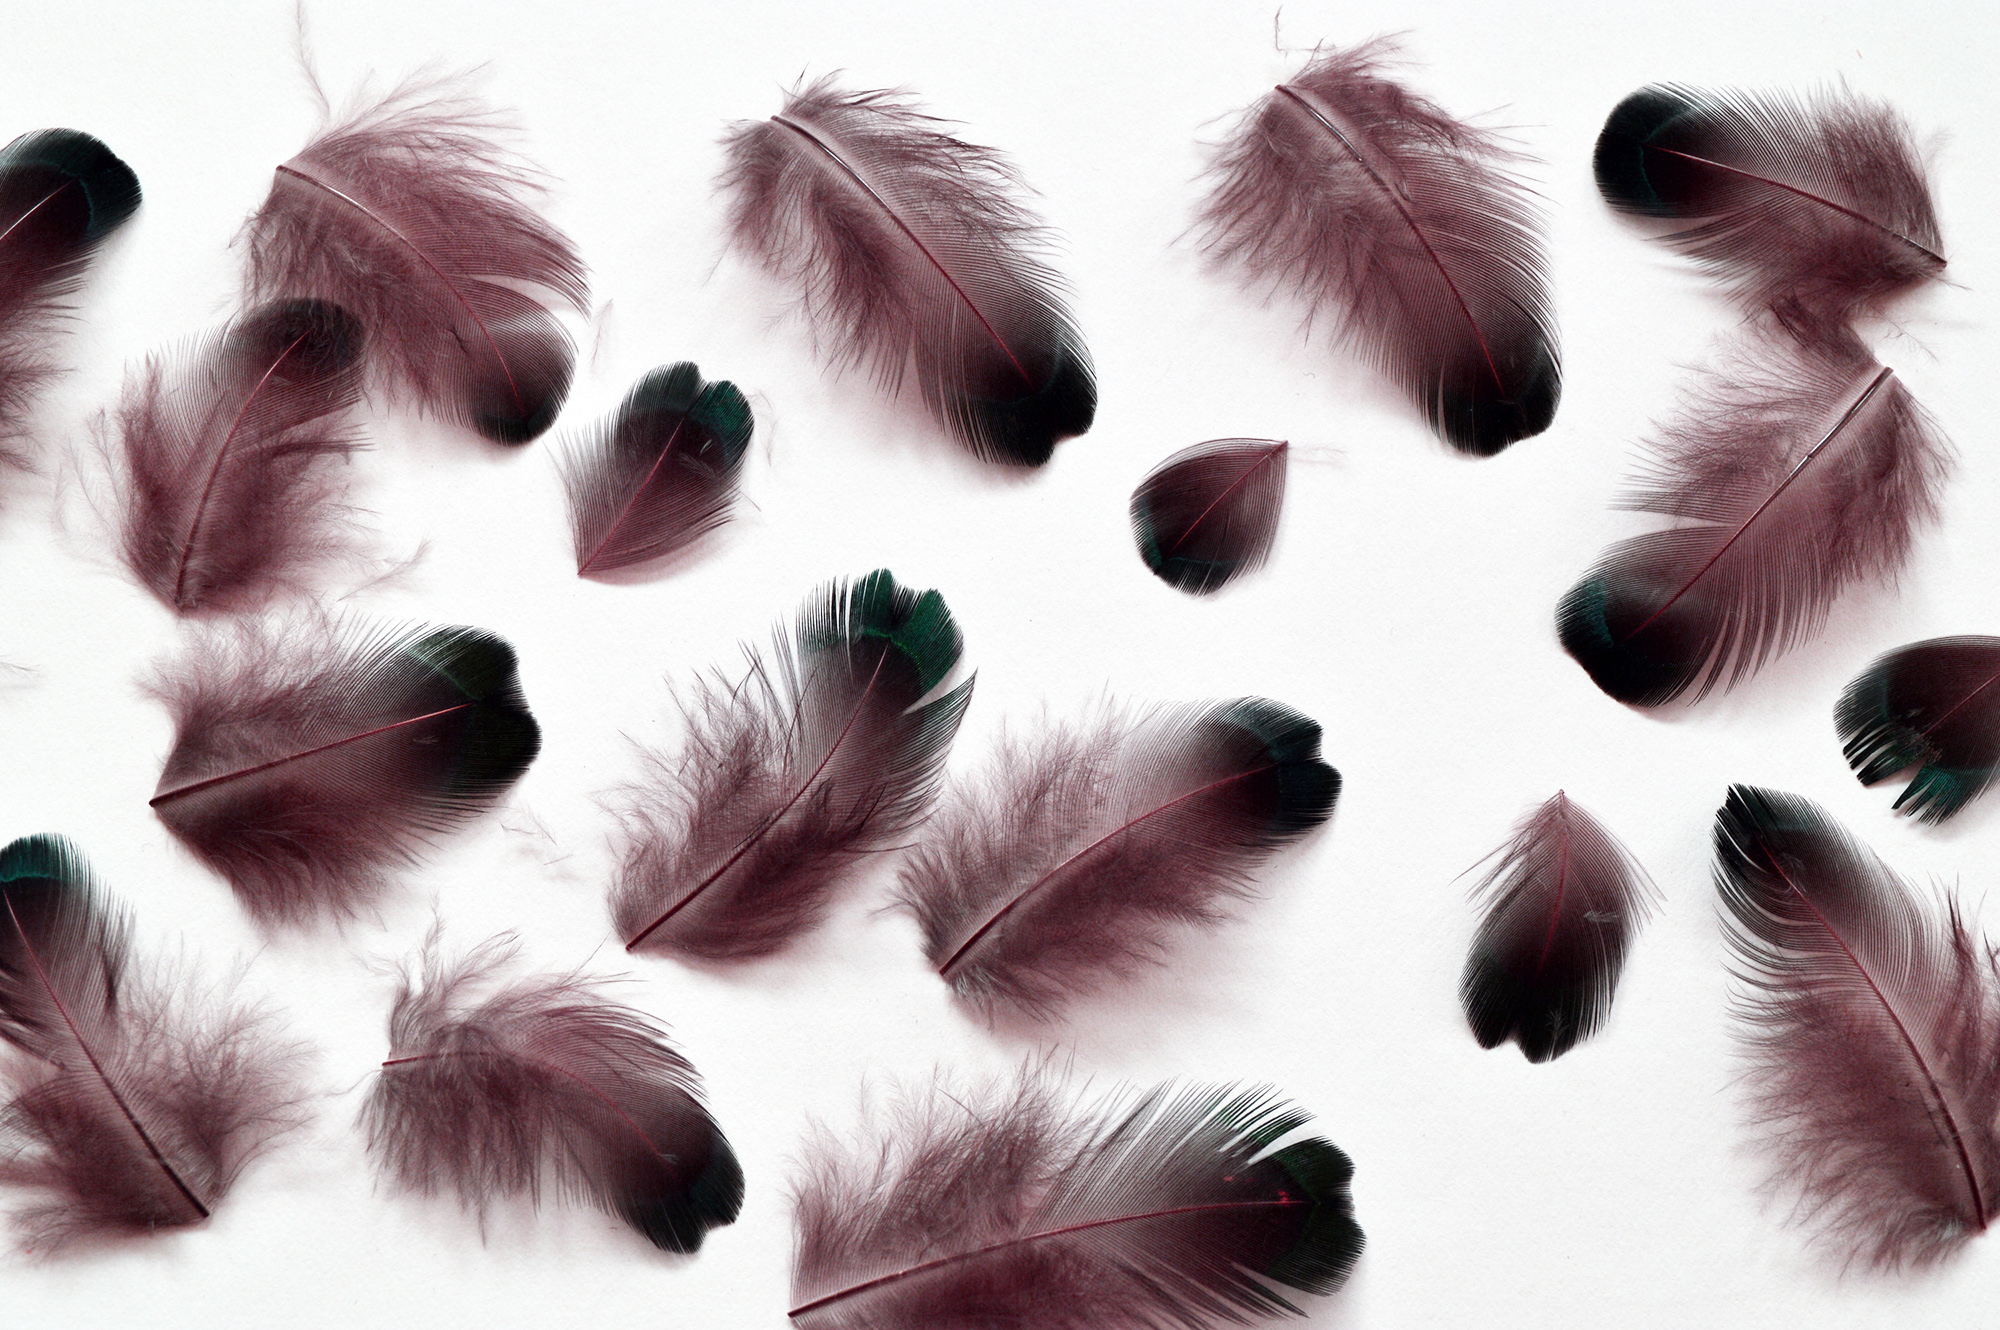 Green Pheasant Feathers